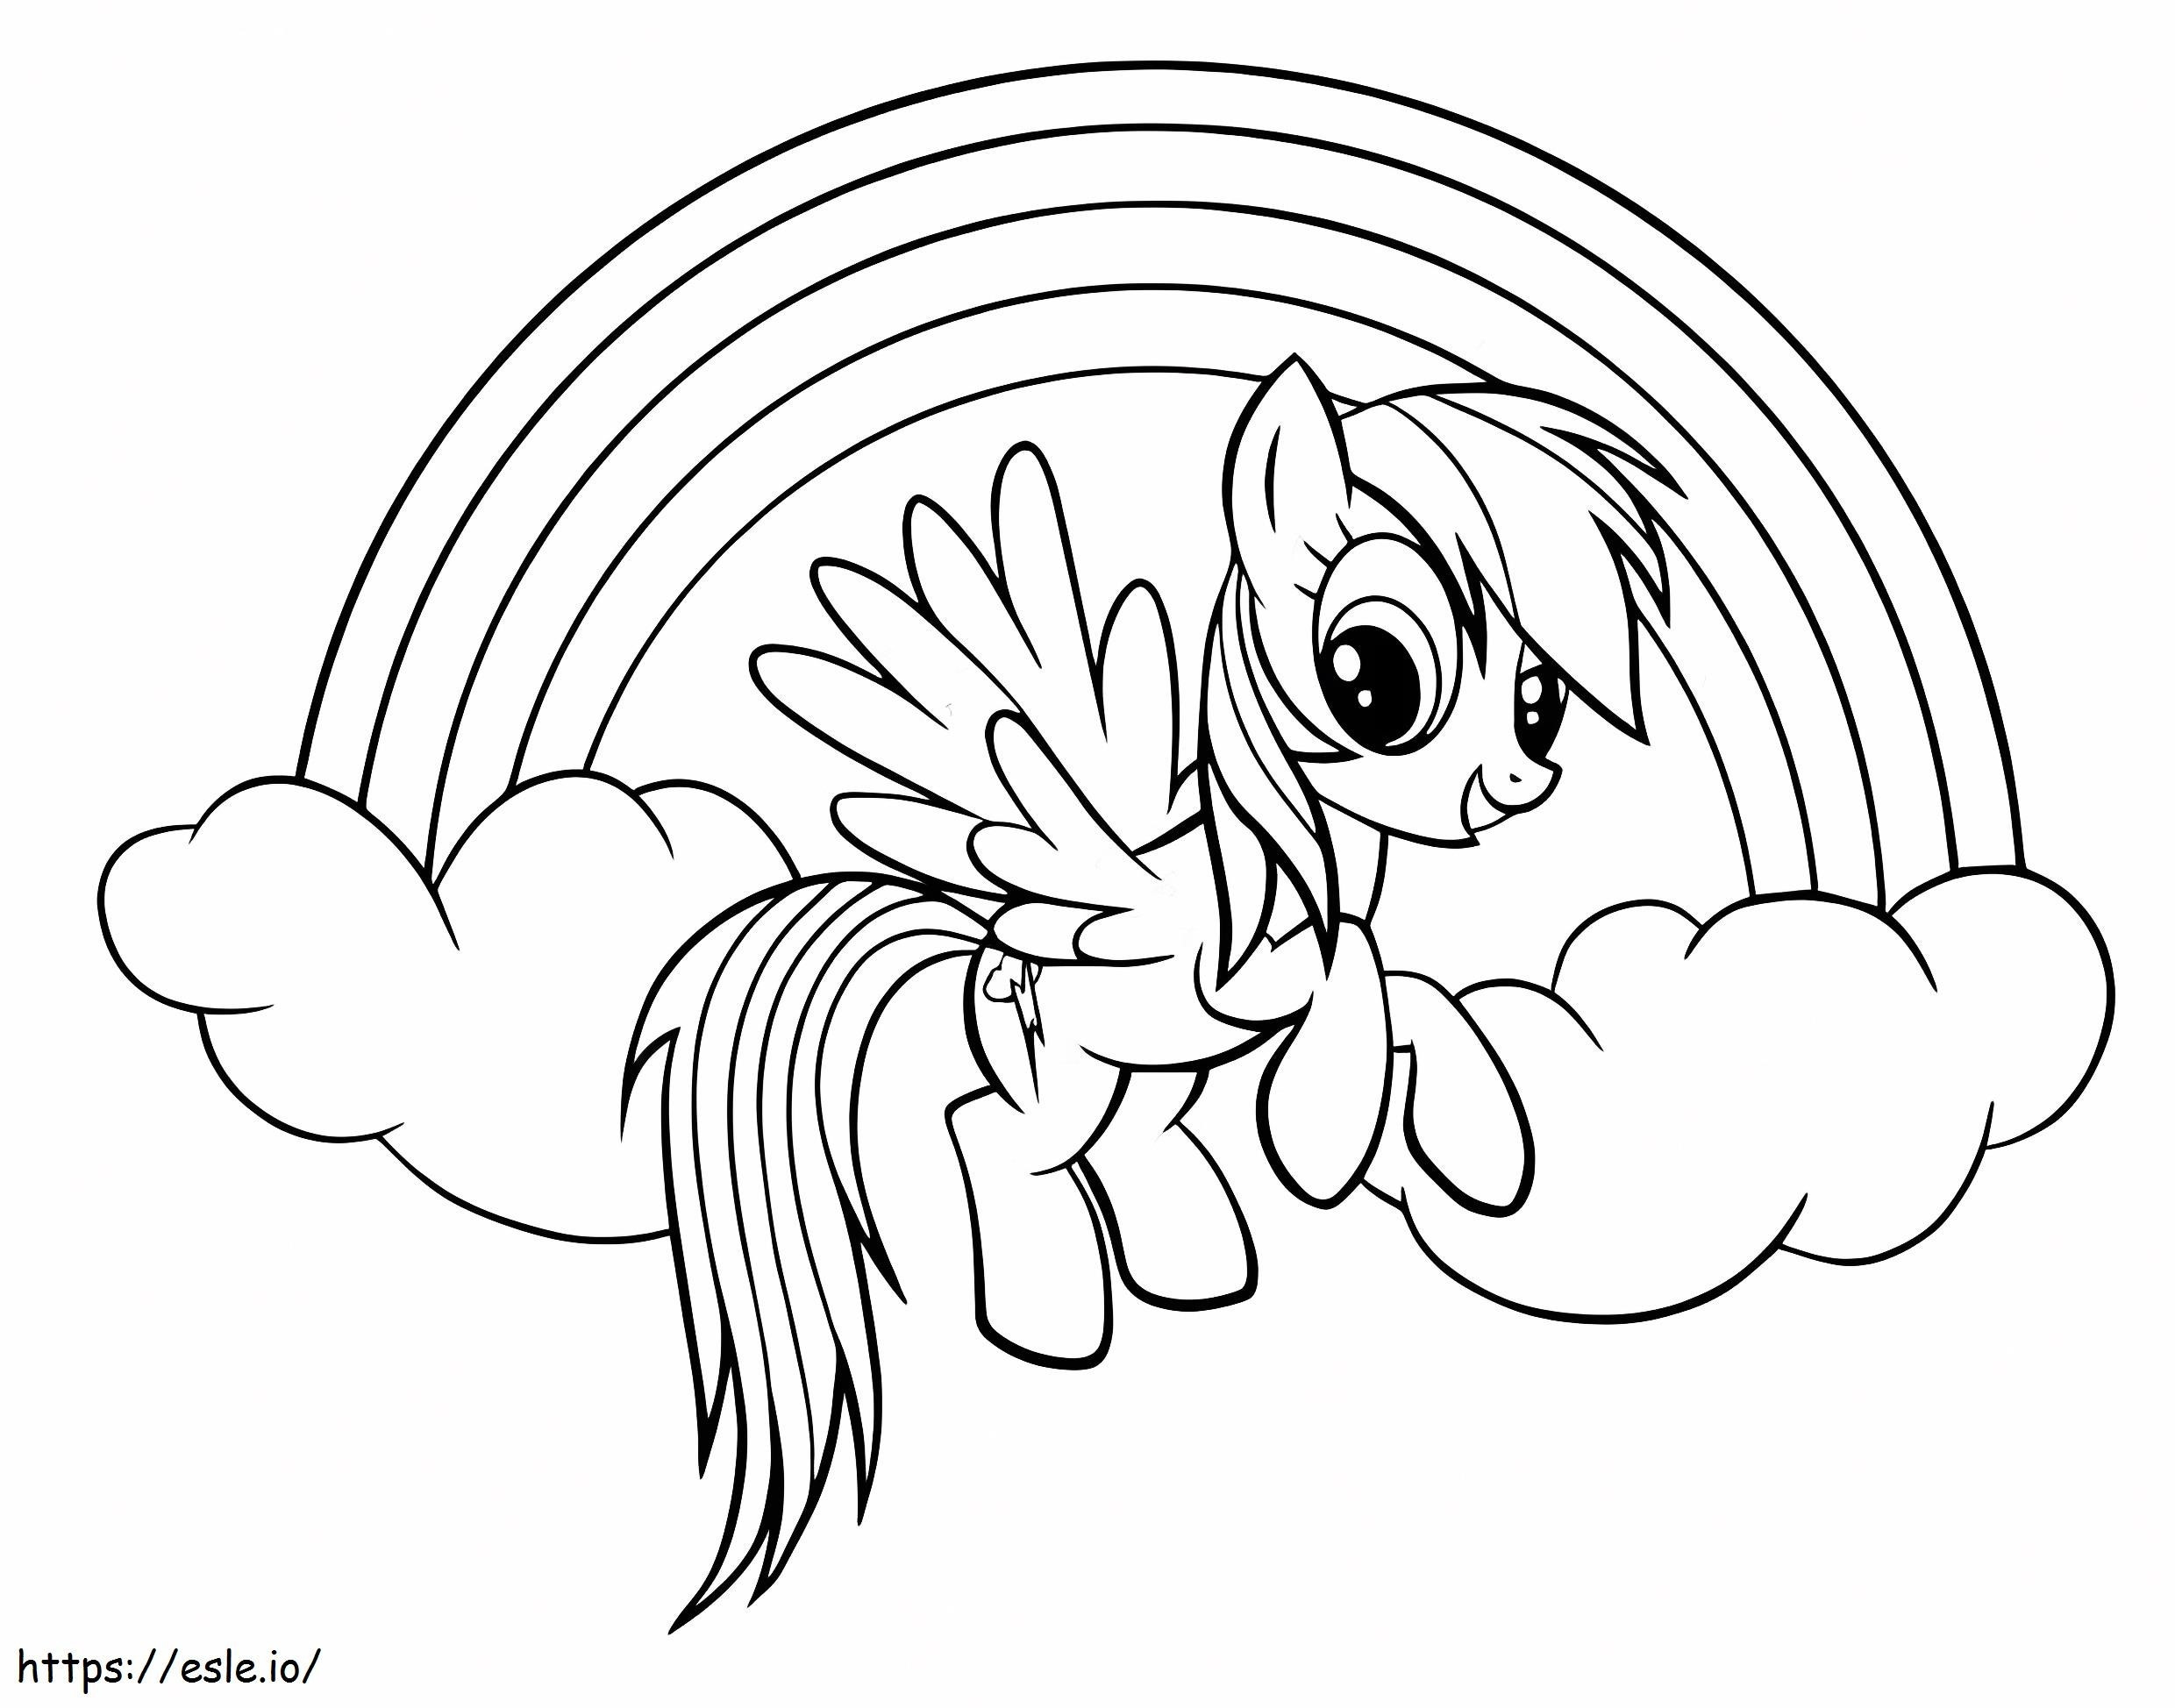 Rainbow Dash And Rainbow coloring page